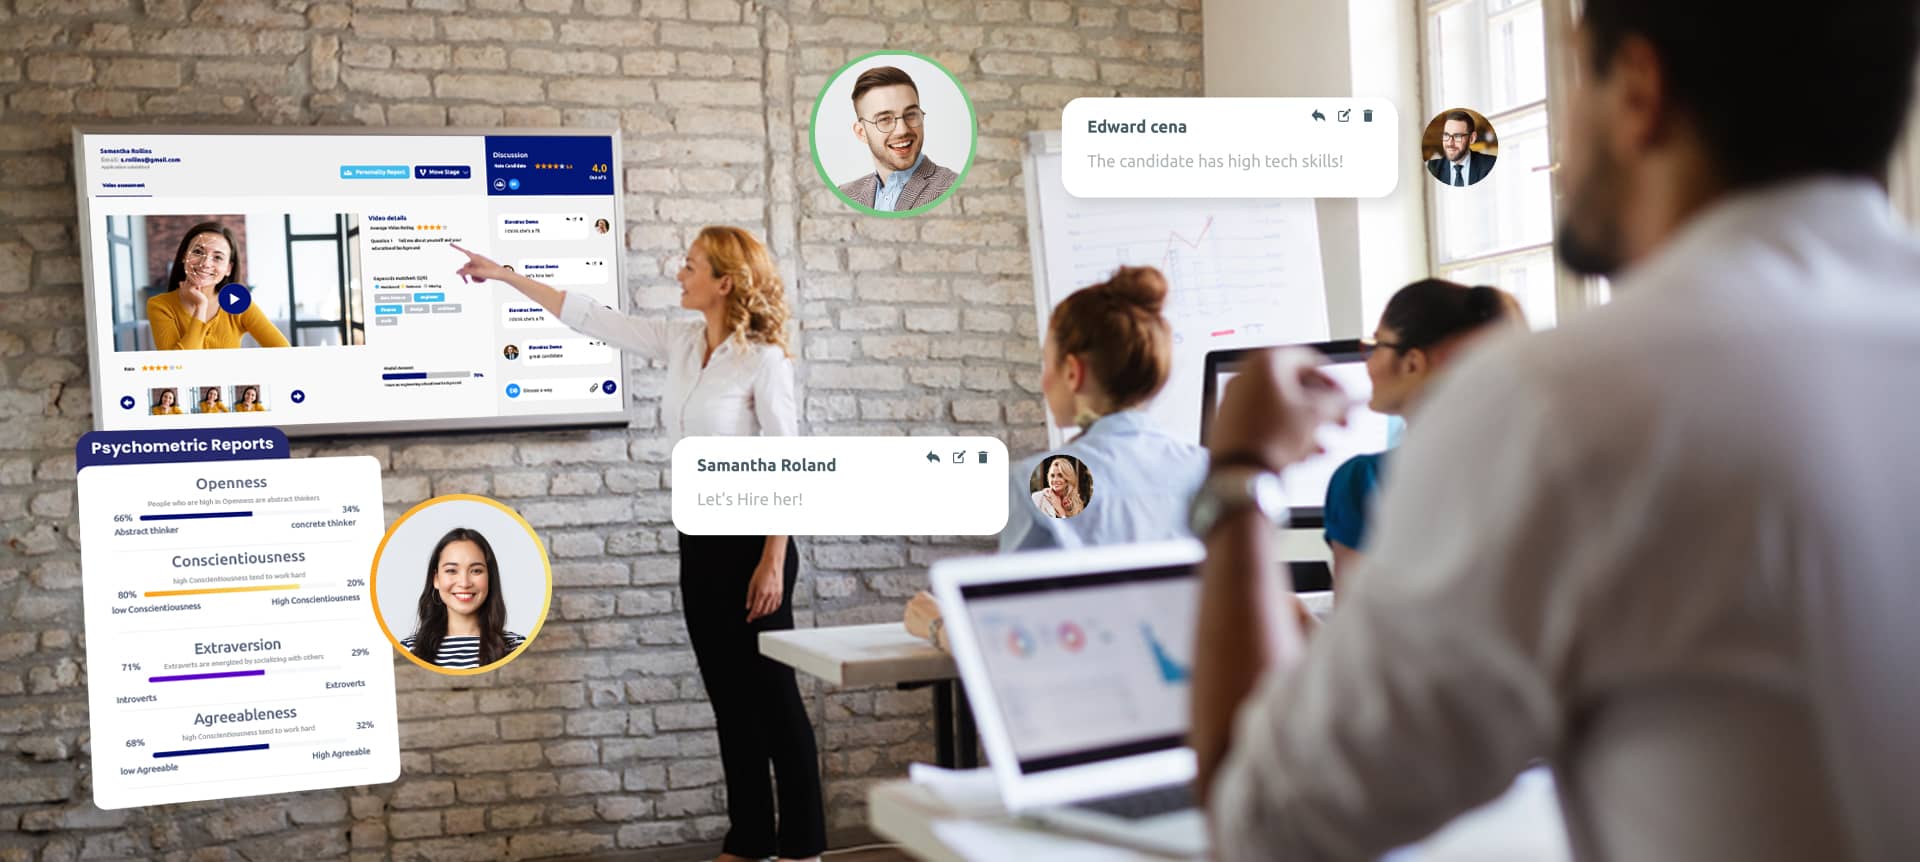 Employees collaborating together while recruiting online